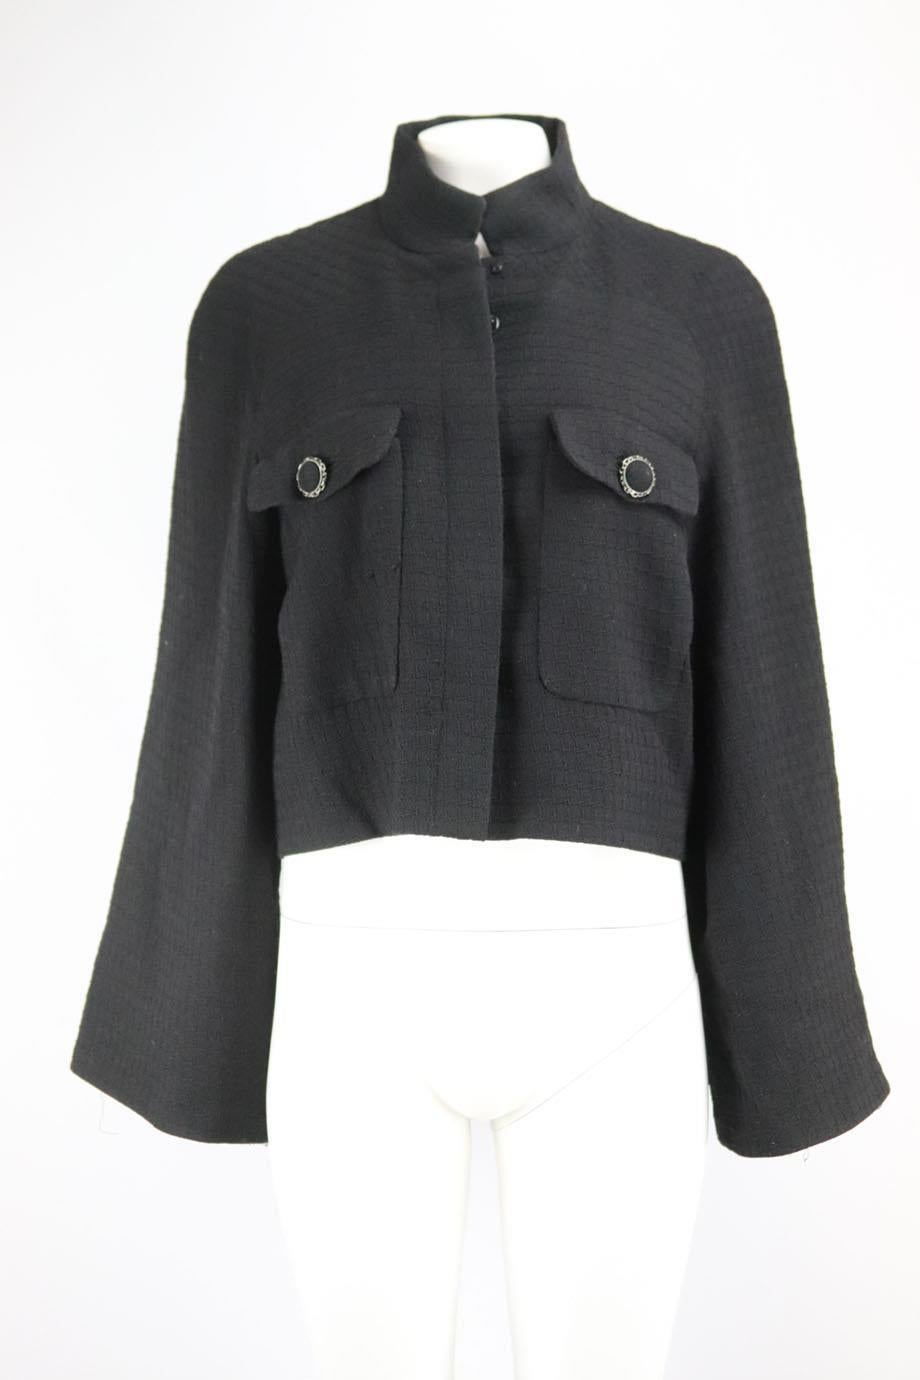 Chanel 2015 wool blend tweed jacket. Black. Long sleeve, v-neck. Button fastening at front. 100% Wool; lining: 100% silk. Size: FR 44 (UK 16, US 12, IT 48). Shoulder to shoulder: 16.5 in. Bust: 47 in. Waist: 47 in. Hips: 47 in. Length: 21.5 in. Very